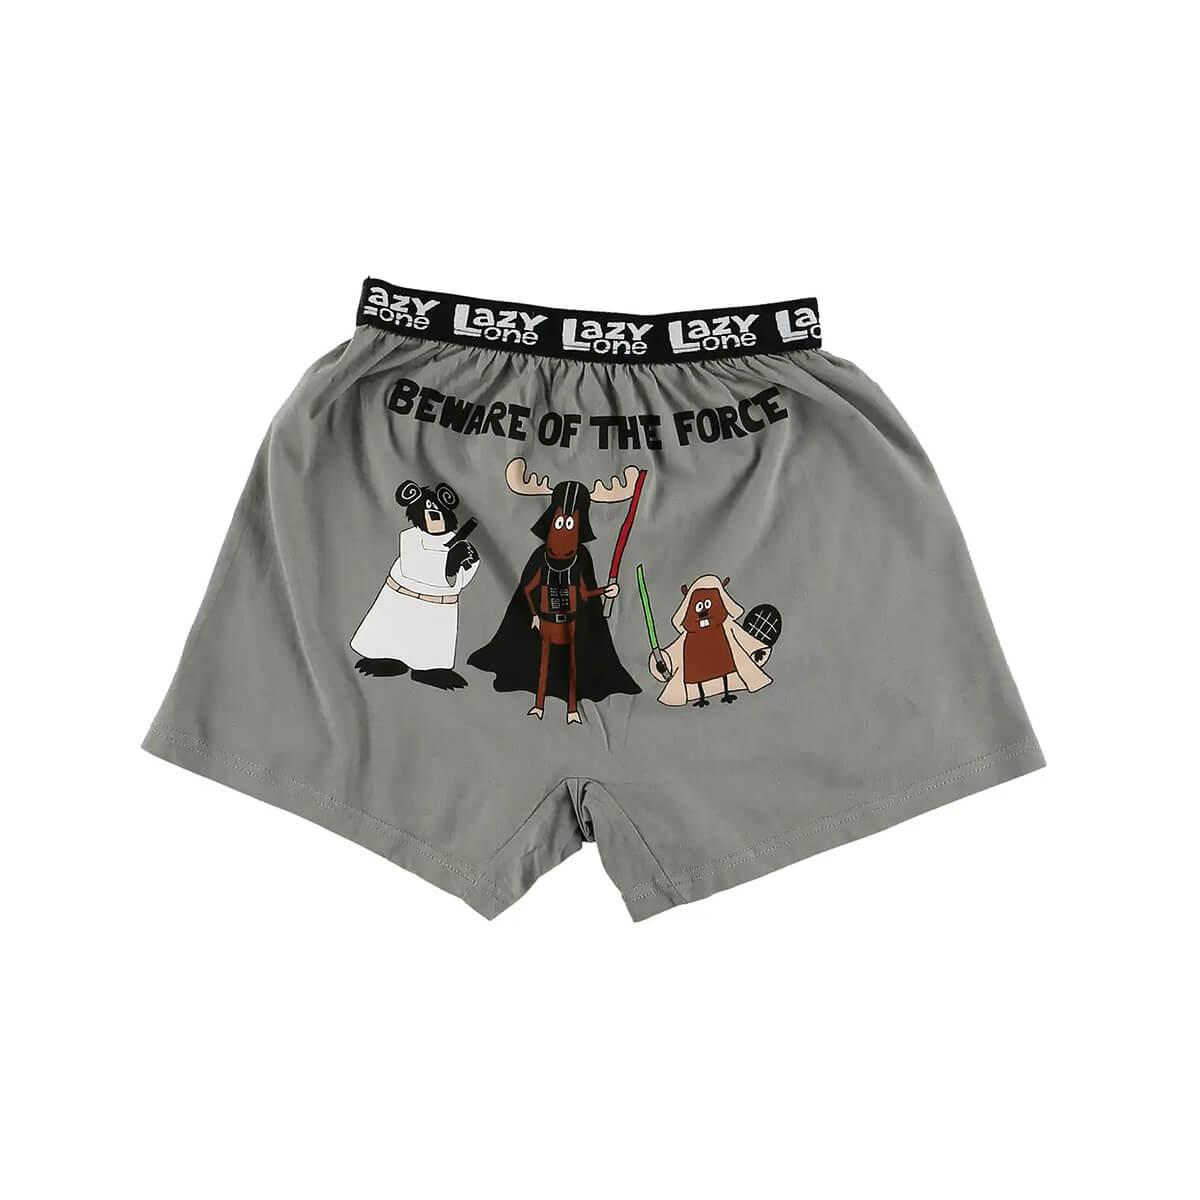 Men's Beware of the Force Funny Boxers